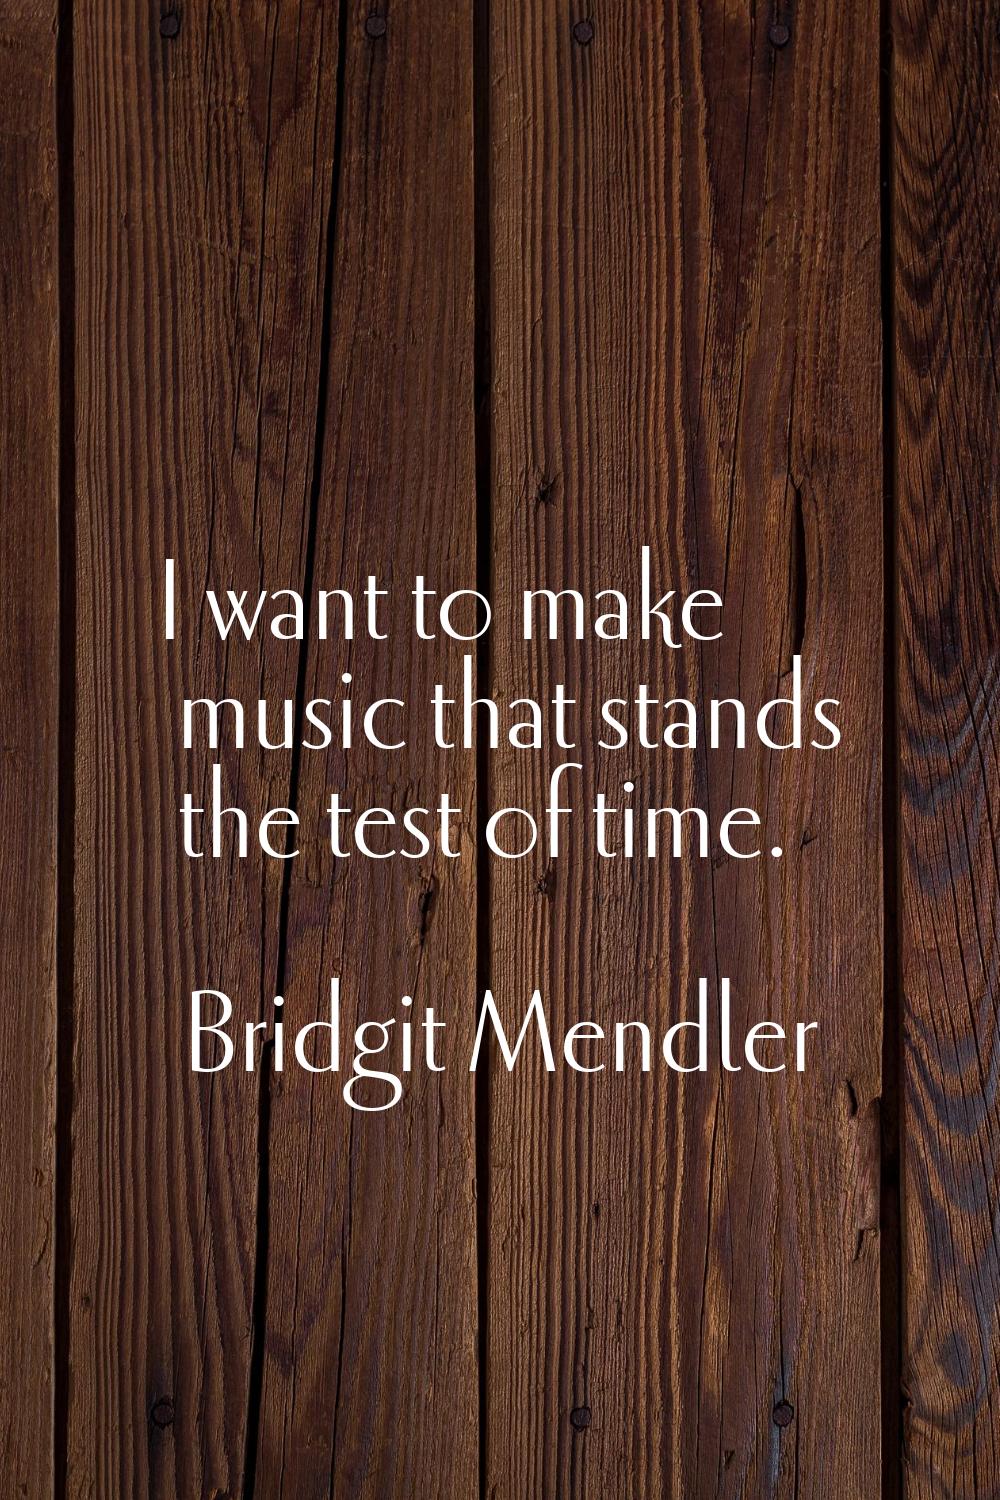 I want to make music that stands the test of time.